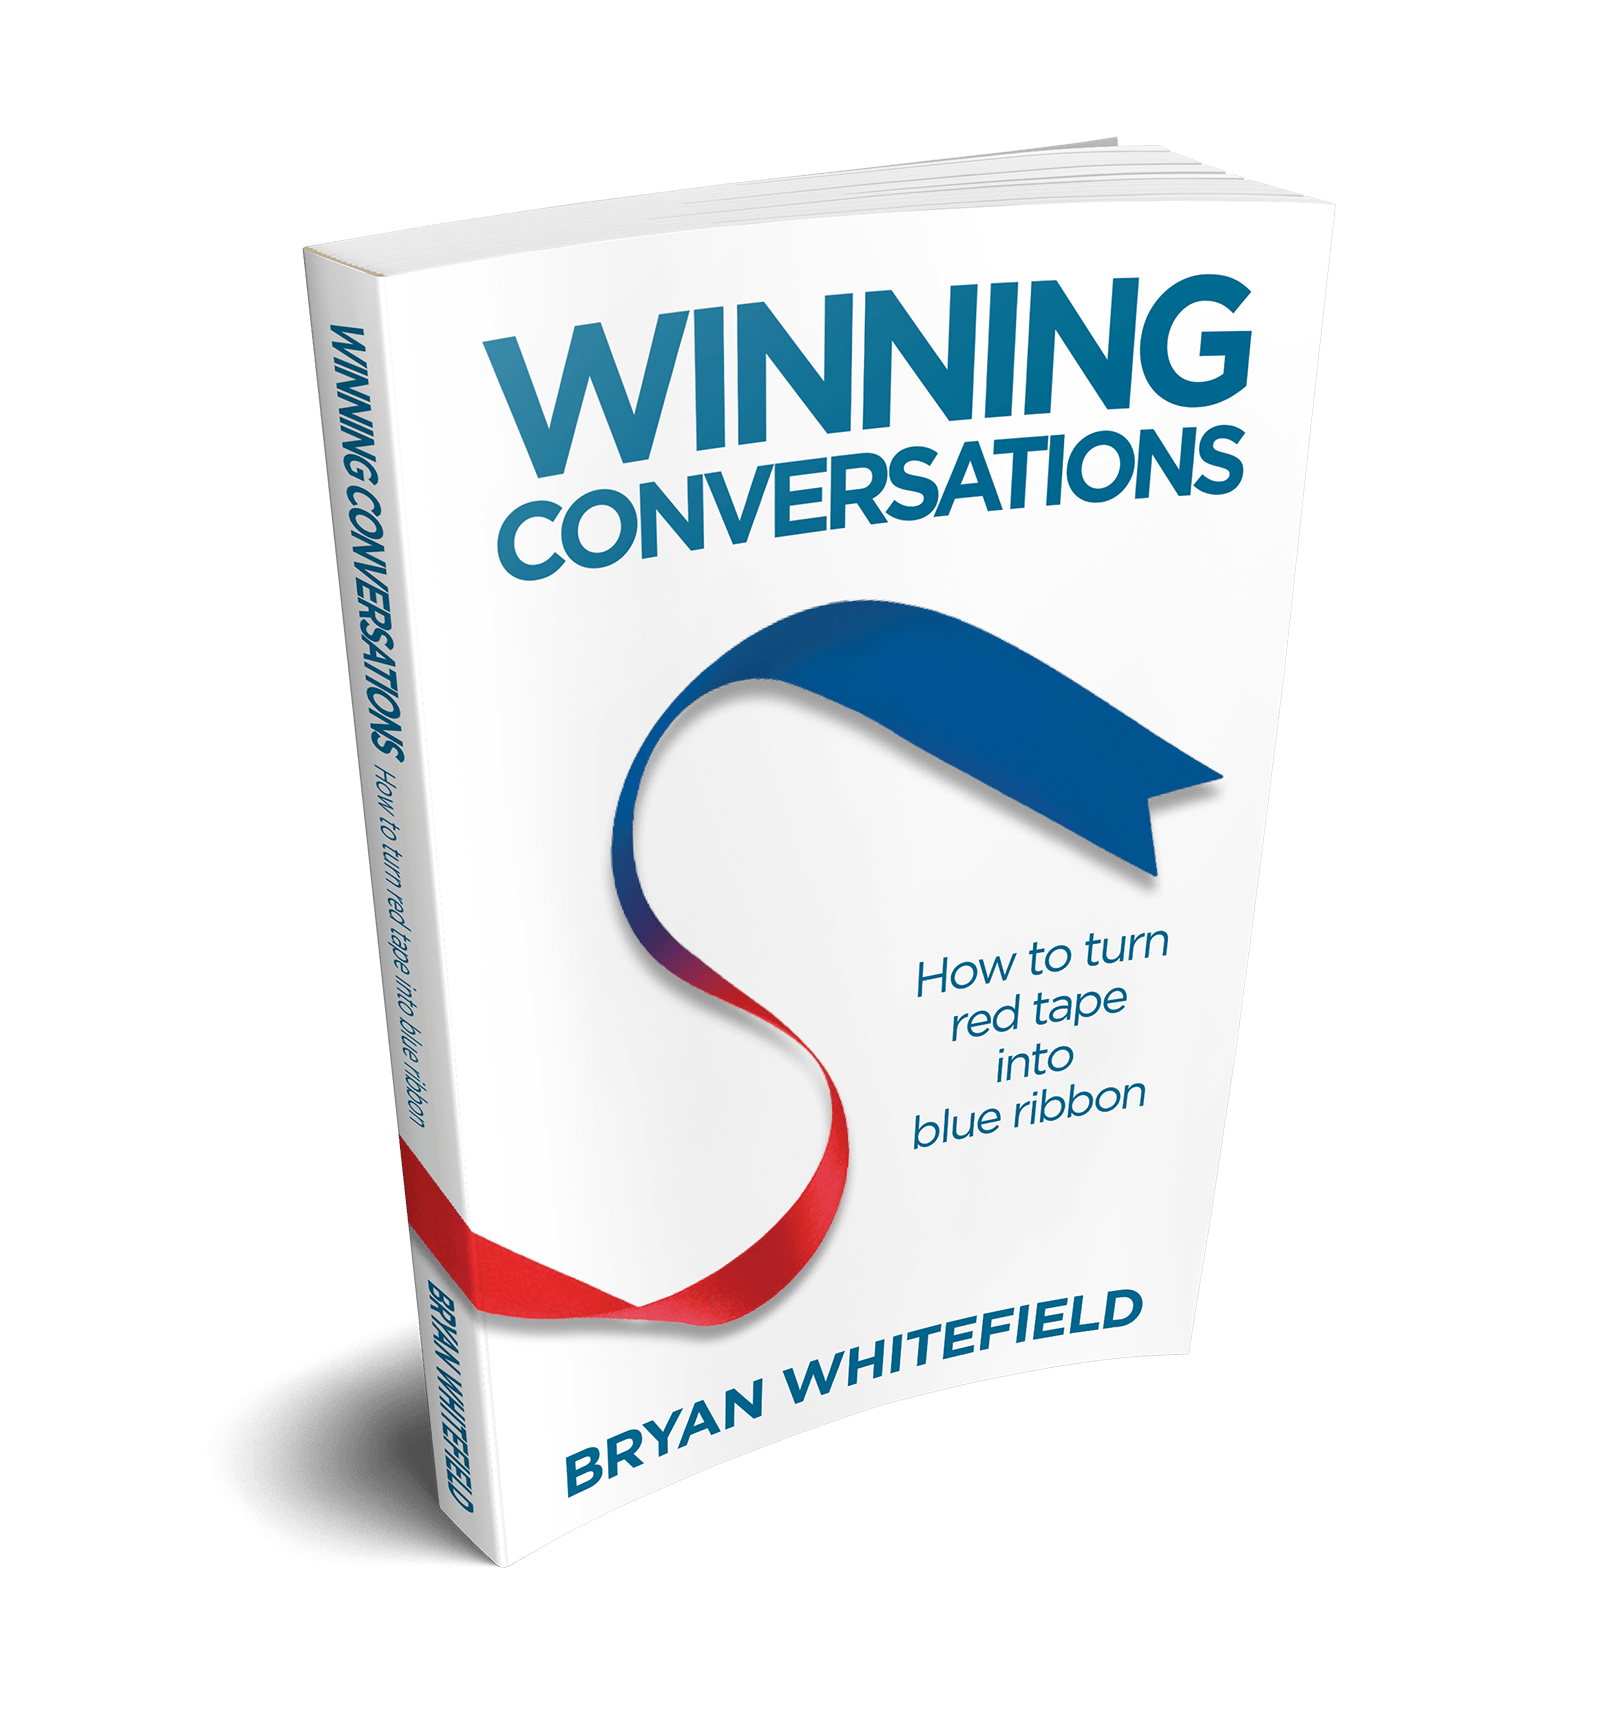 Red and Blue Ribbon Logo - Winning Conversations: How to turn red tape into blue ribbon